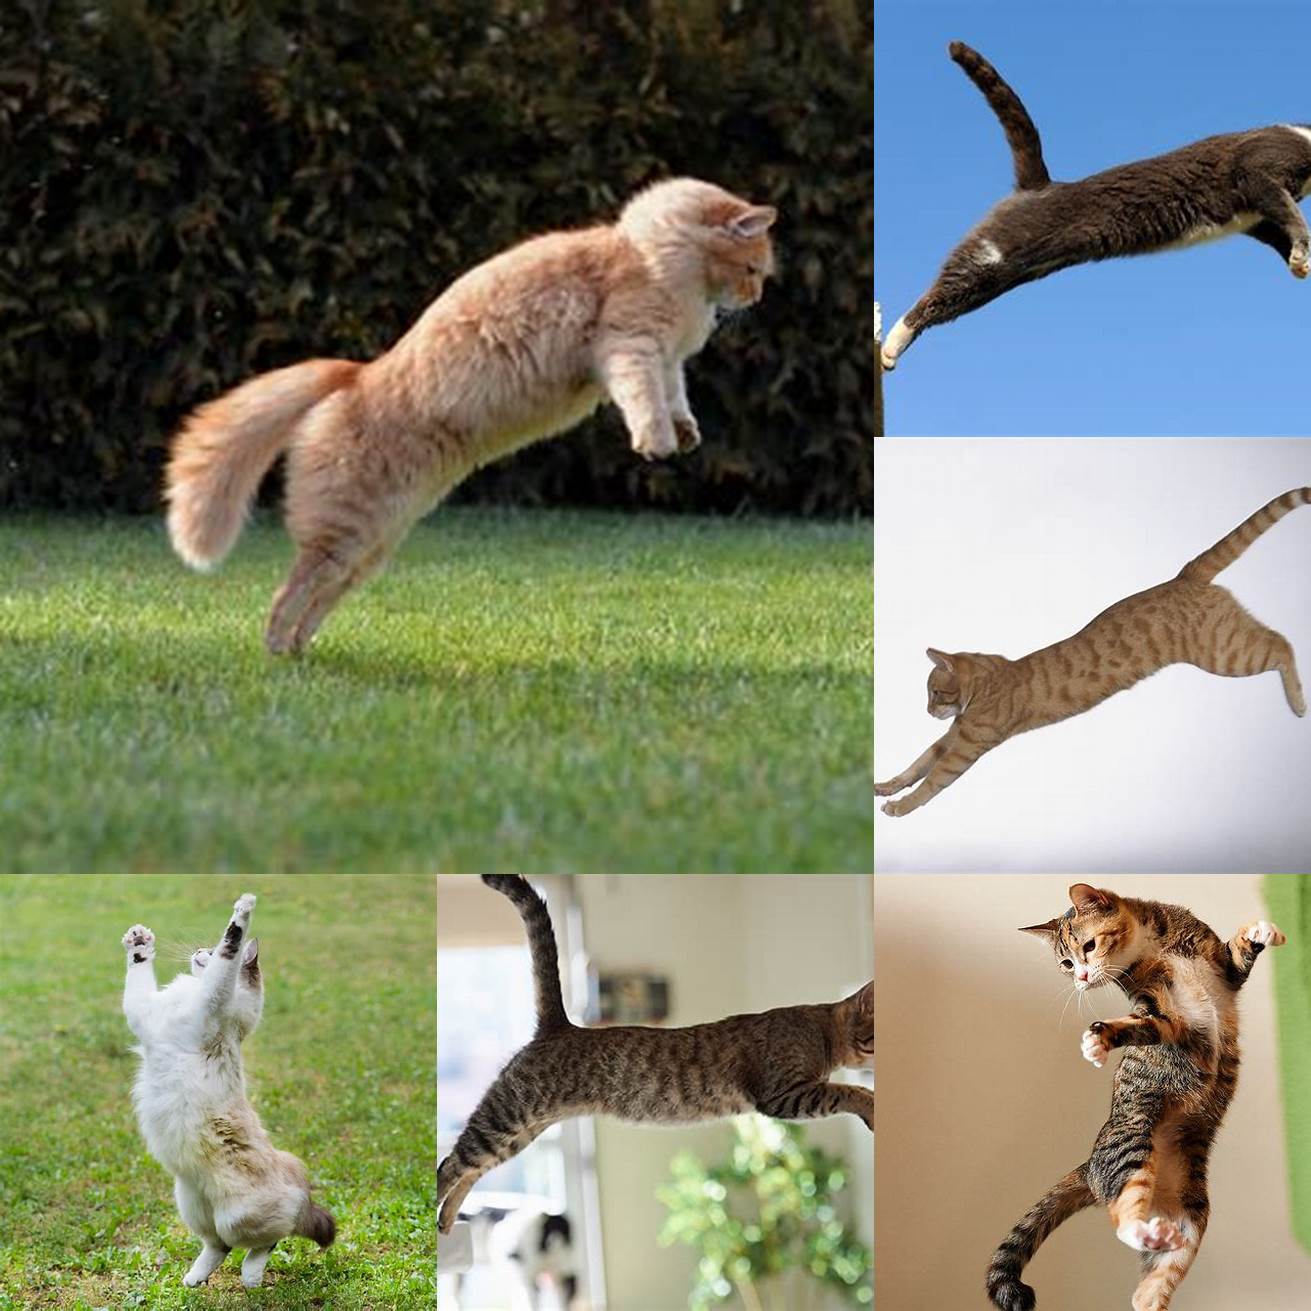 Cats are able to jump up to six times their own length in one leap